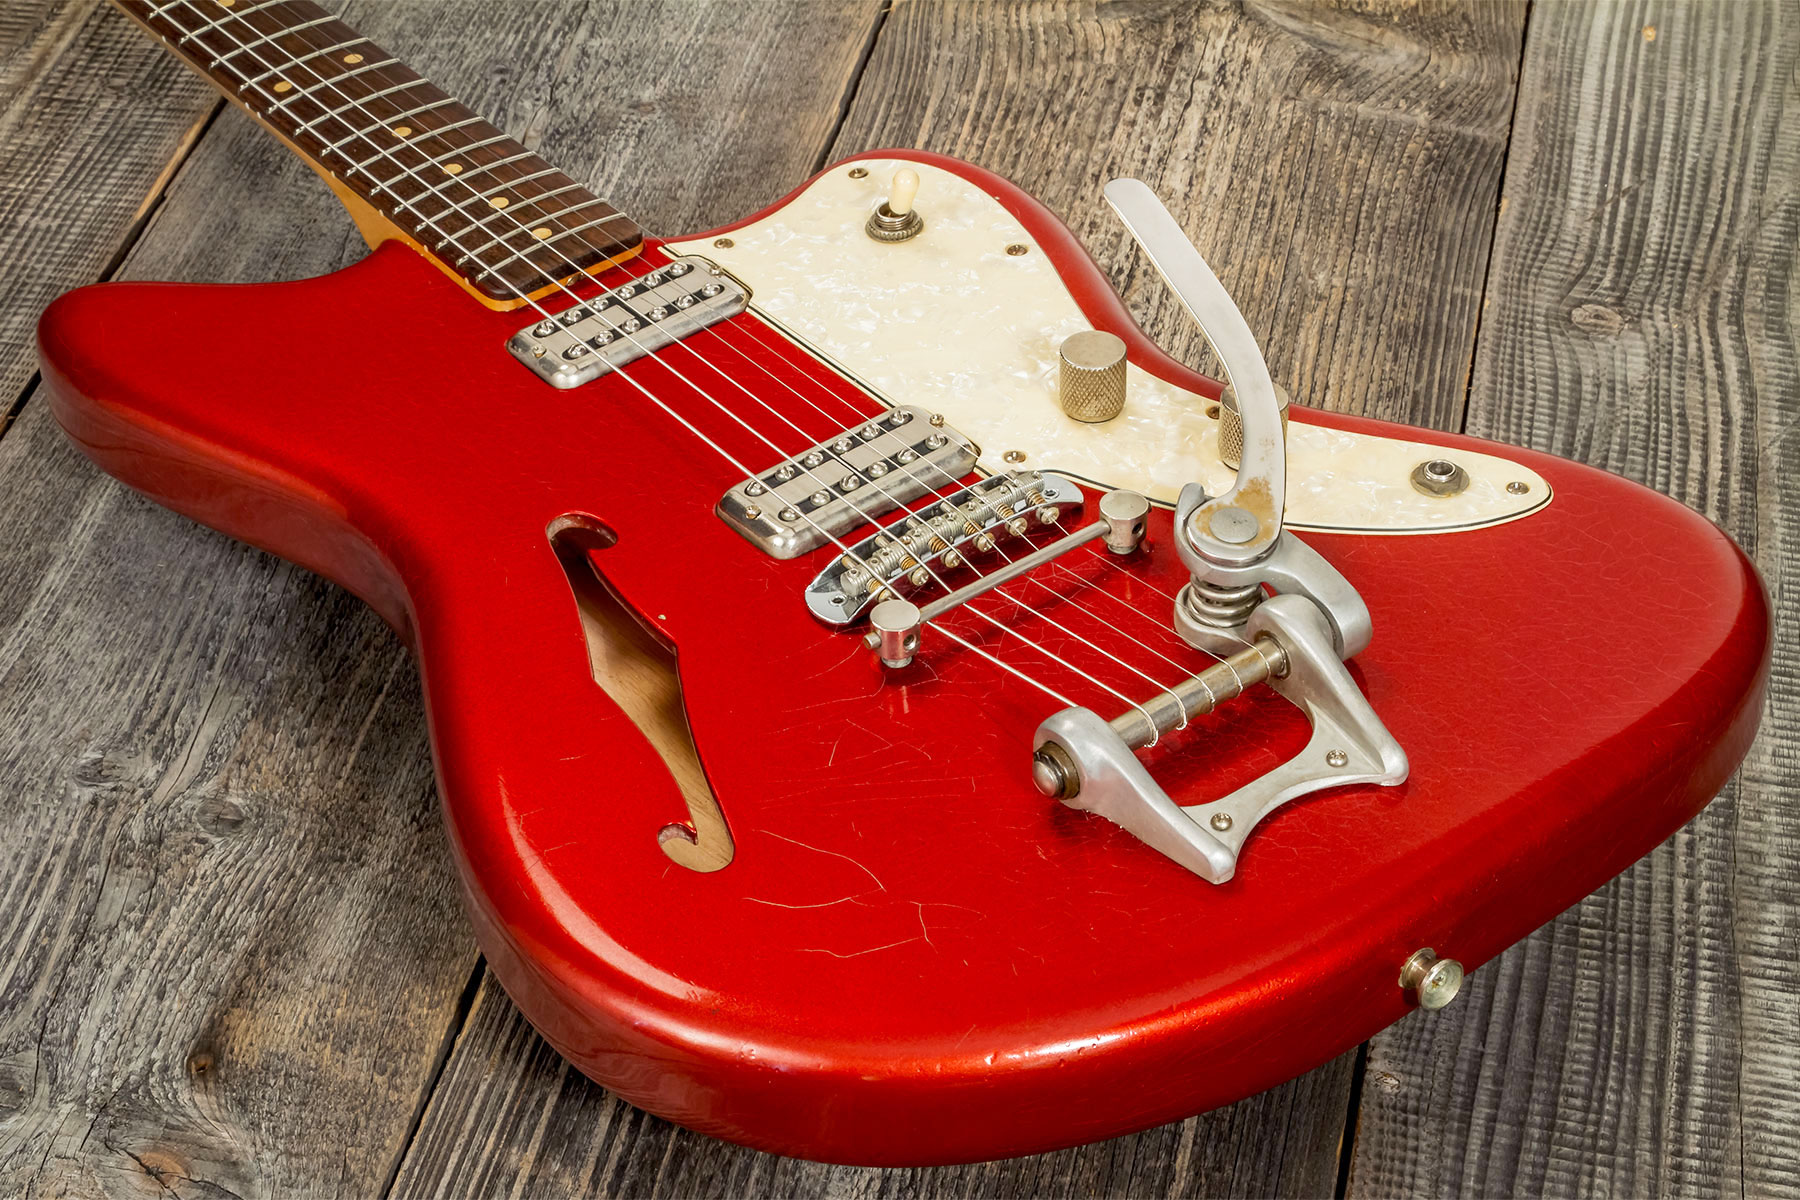 Rebelrelic Wrangler 2h Trem Rw #62175 - Light Aged Candy Apple Red - Semi-hollow electric guitar - Variation 2